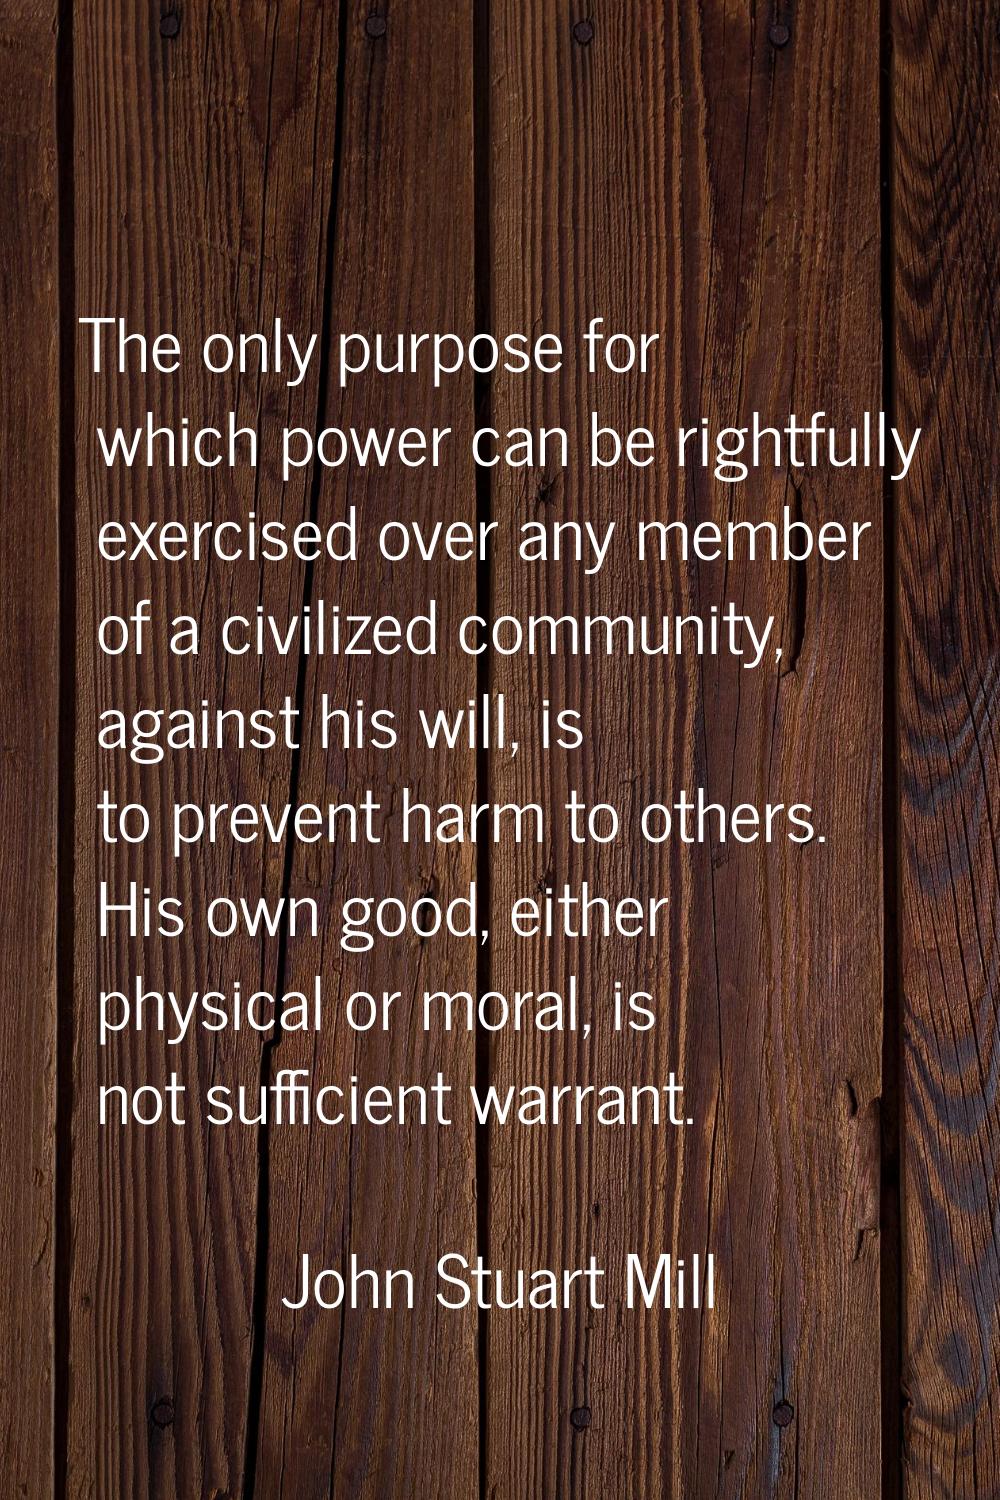 The only purpose for which power can be rightfully exercised over any member of a civilized communi